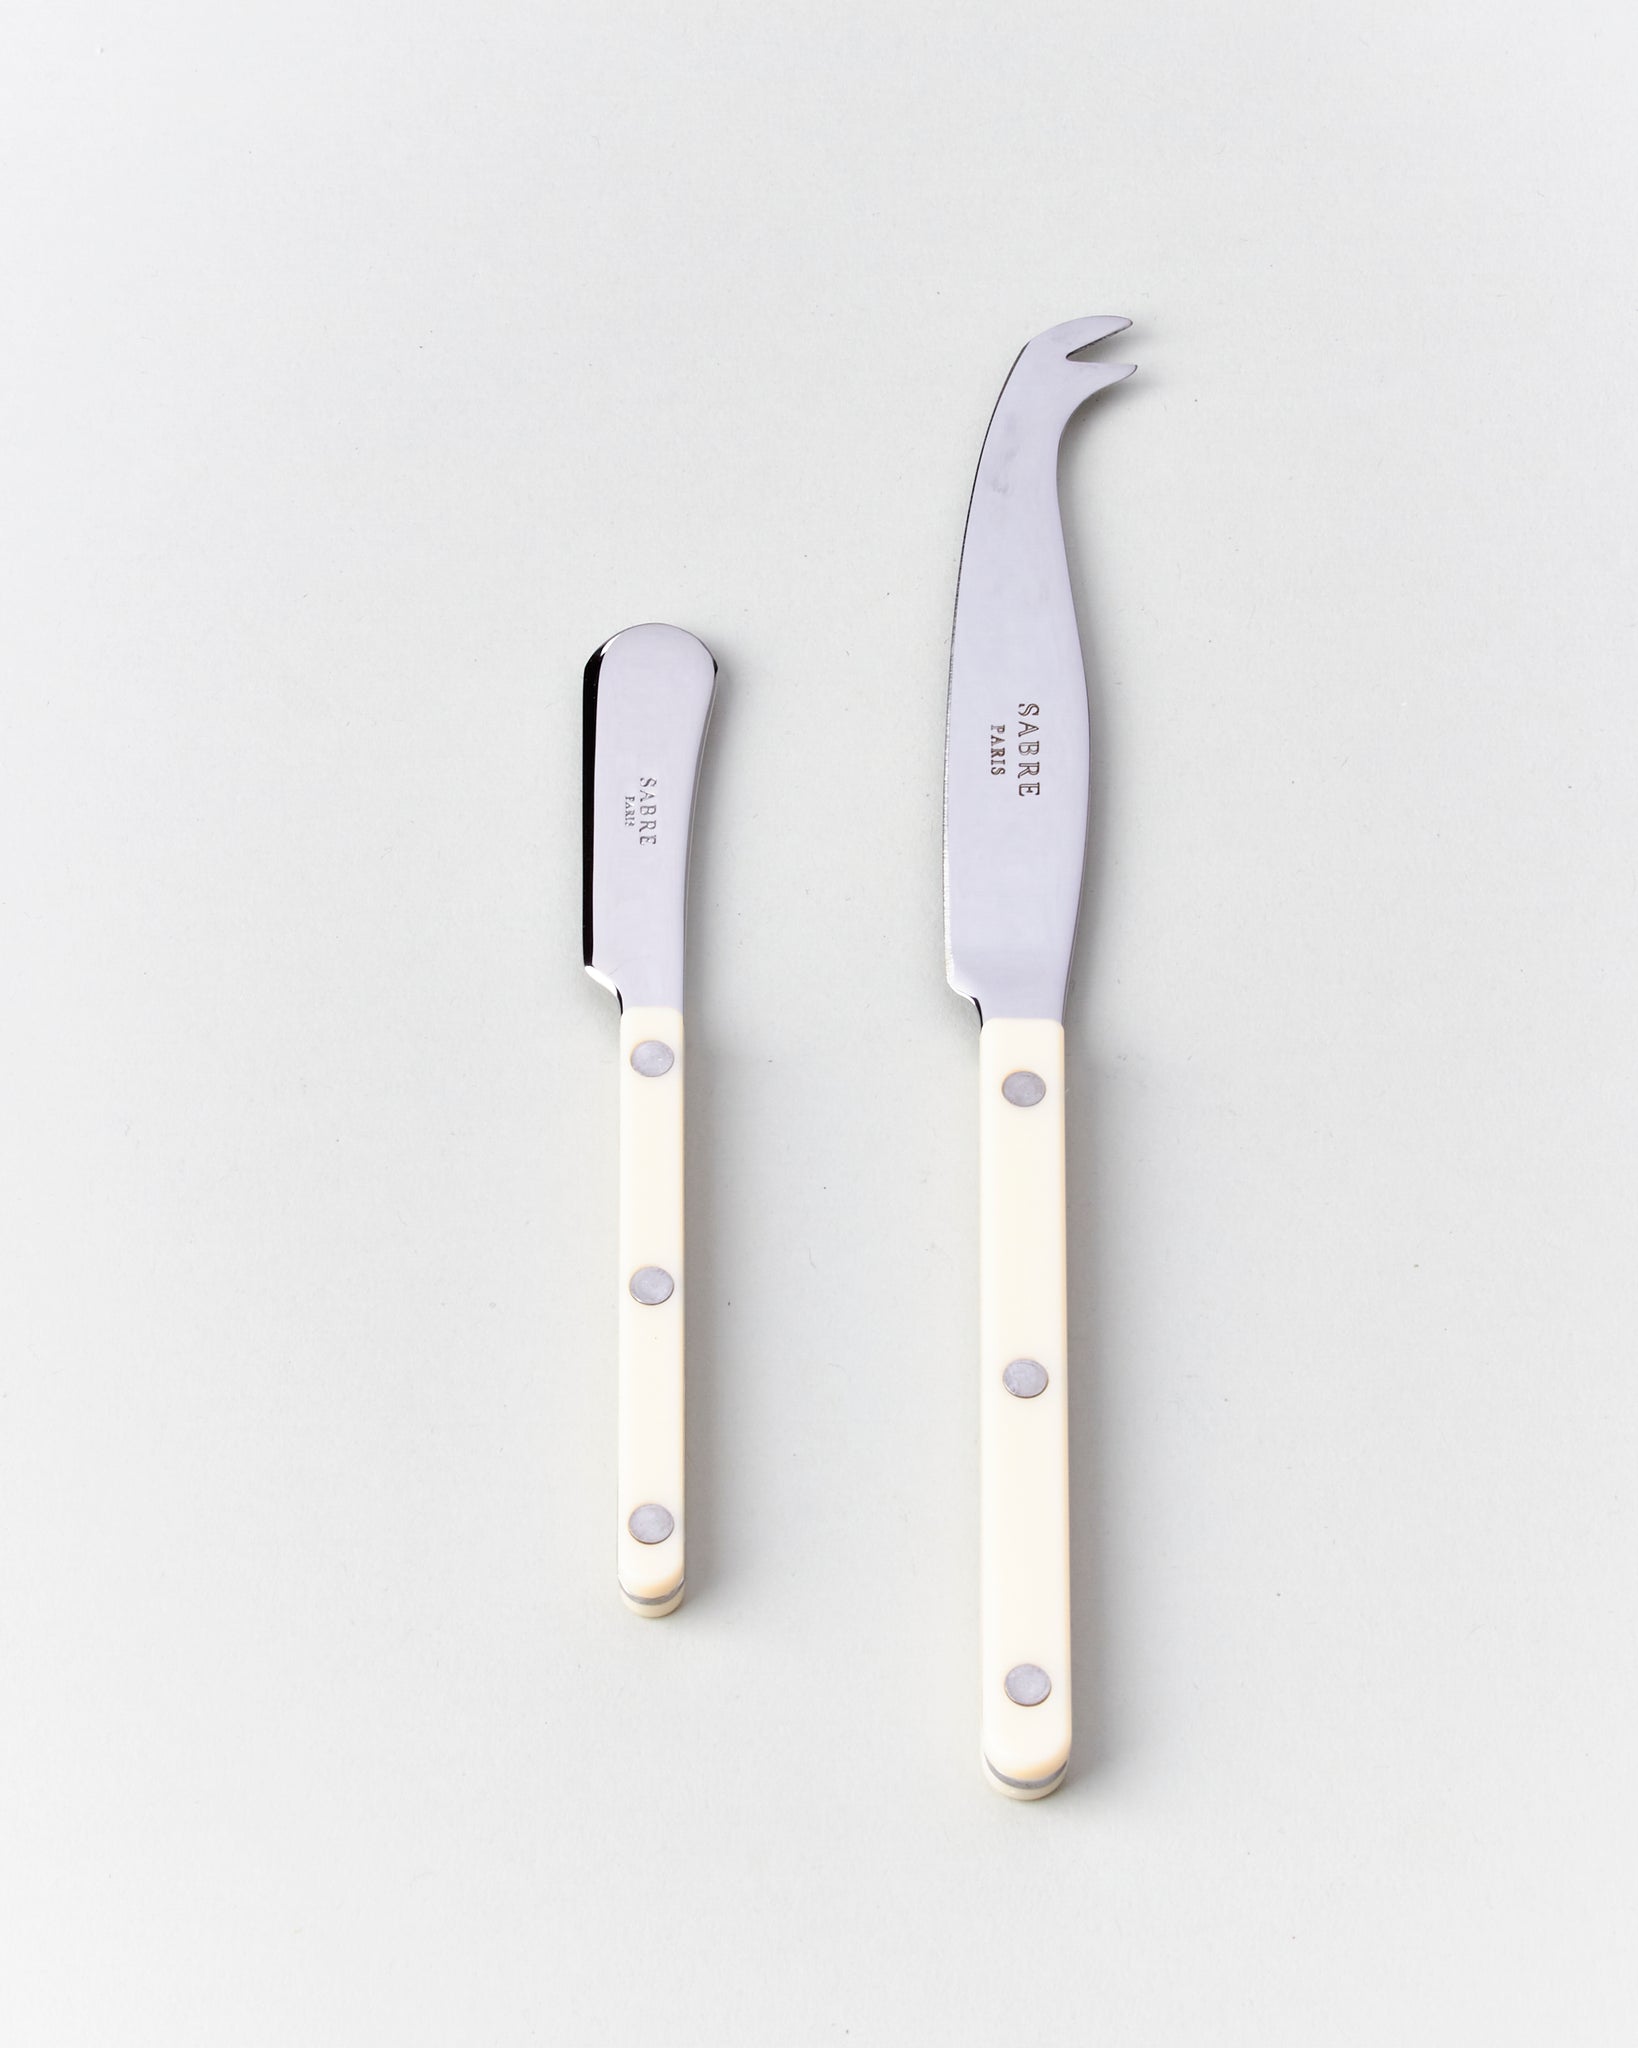 Ivory Bistrot Cheese Knife and Spreader